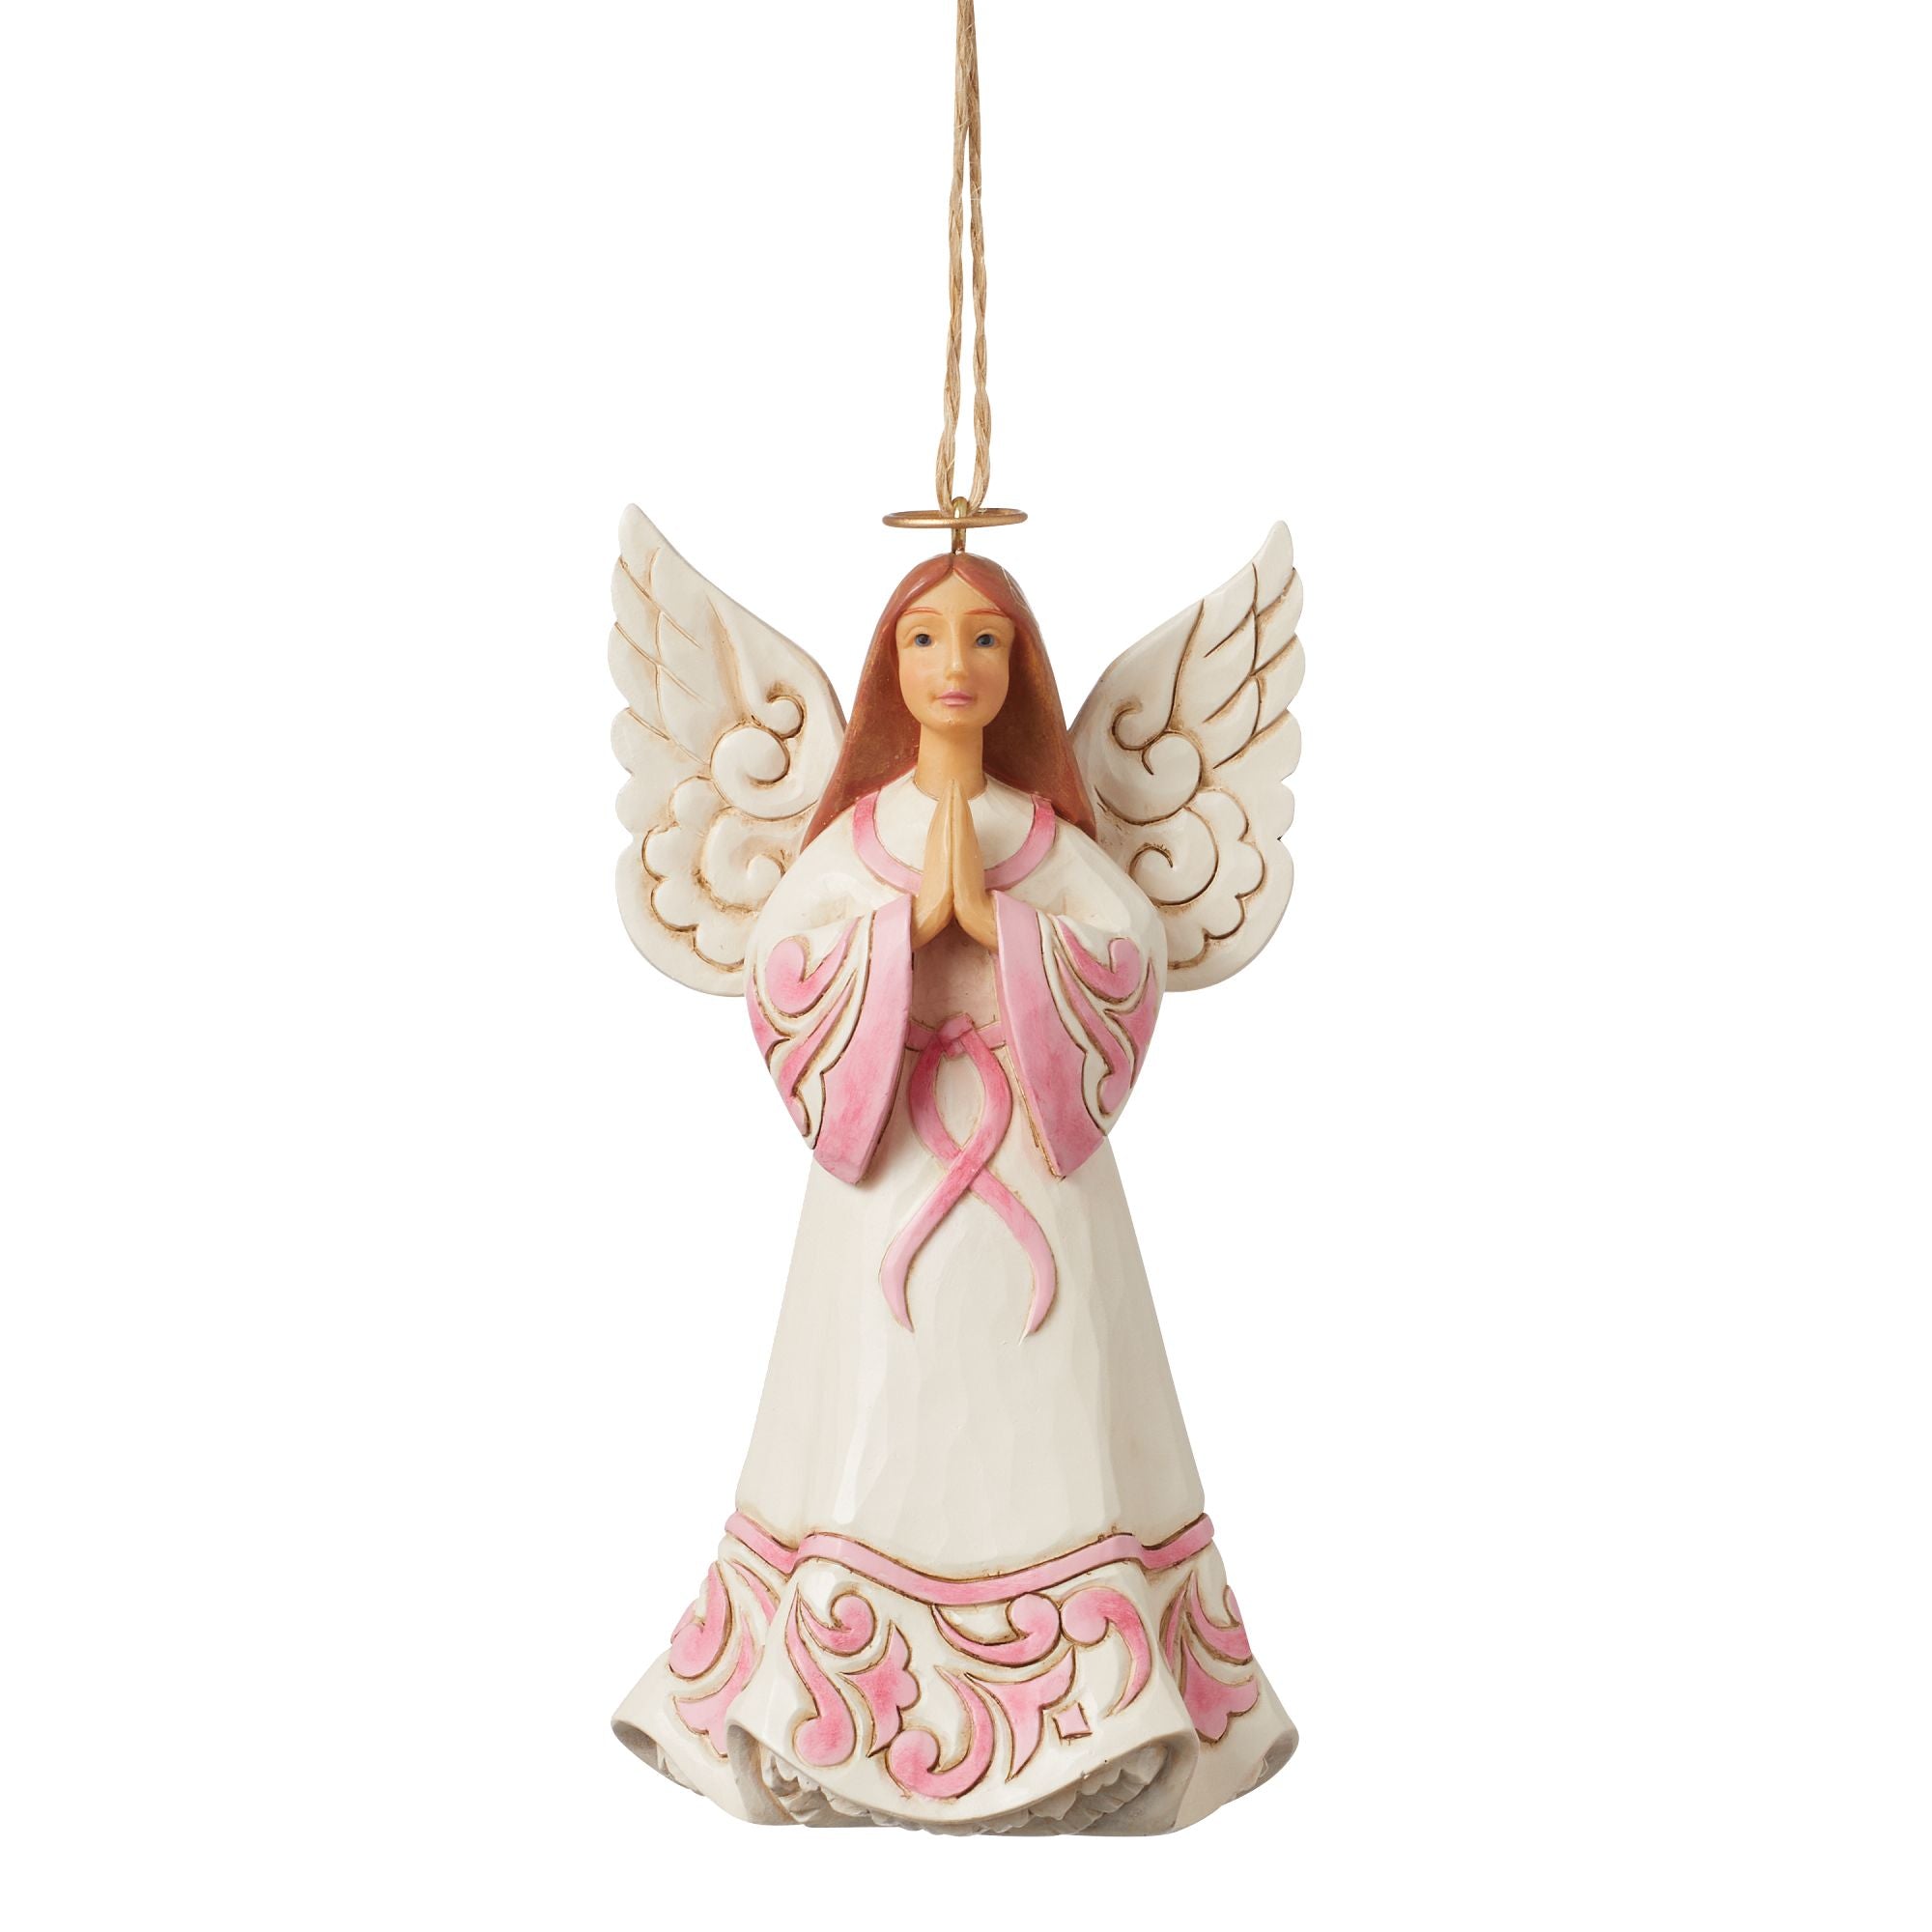 The Annual Rose Angel Ornament